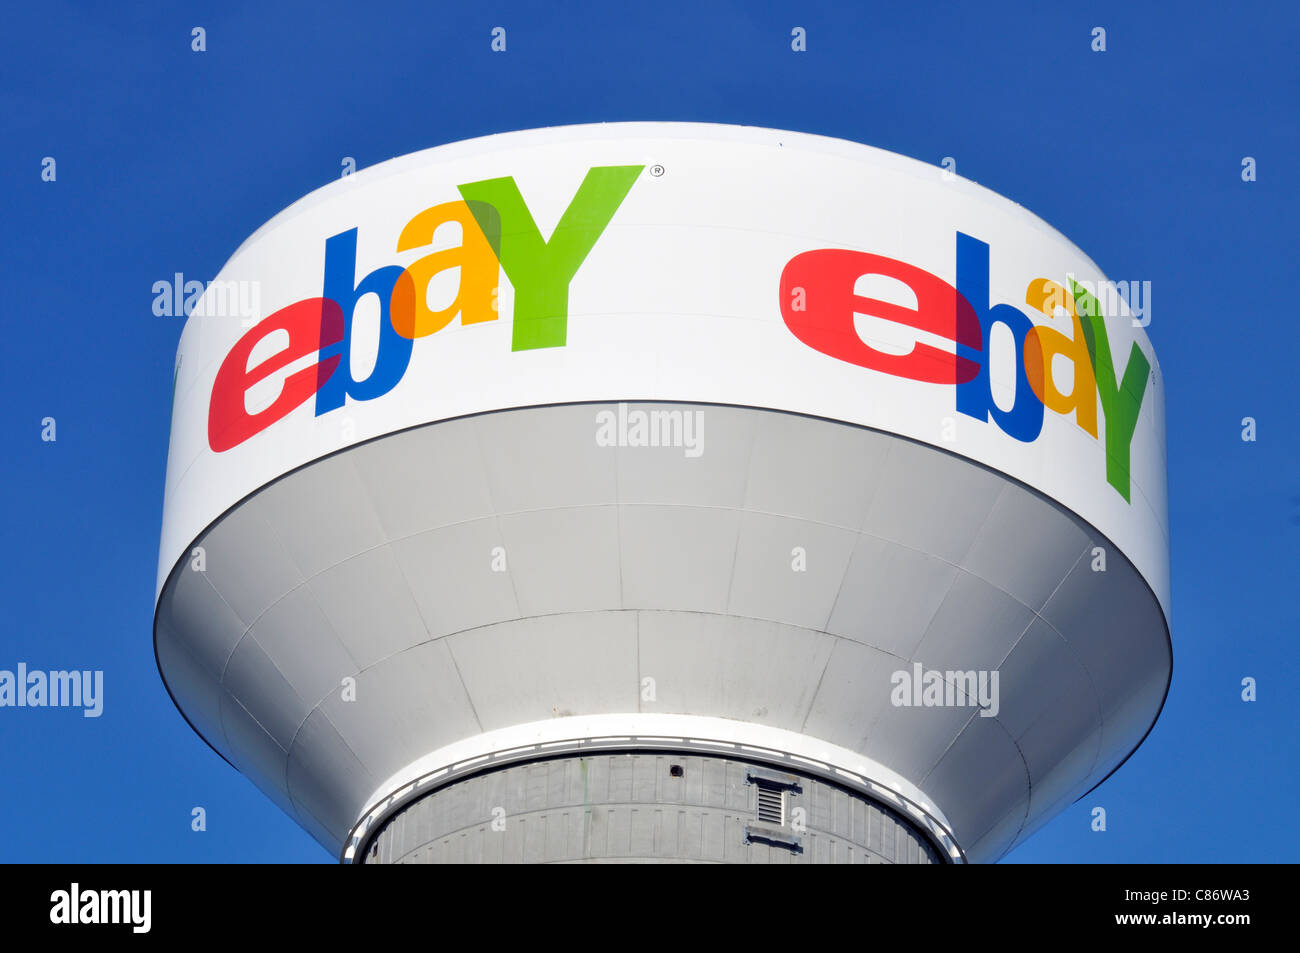 ebay logo on water tower on a clear blue sky day. USA Stock Photo